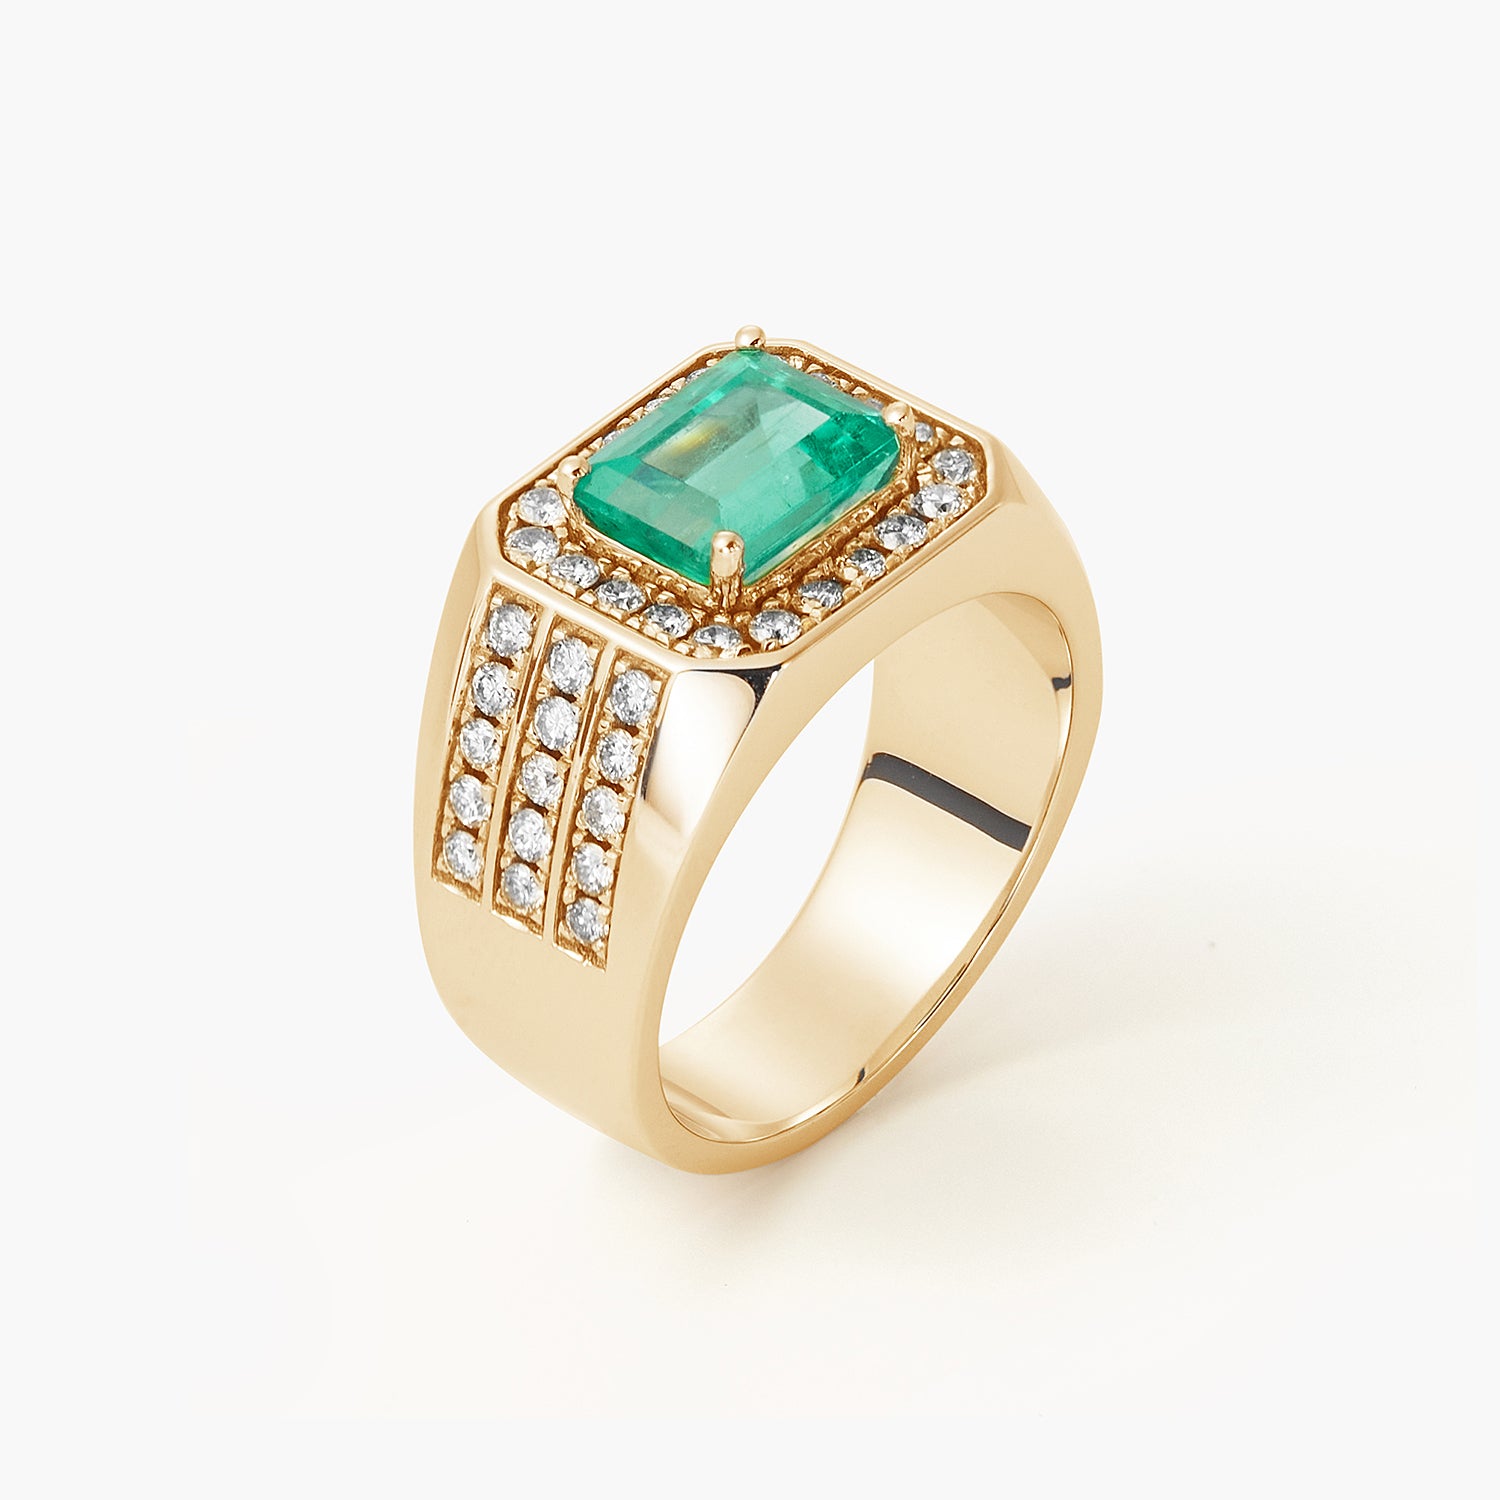 Emerald Men's Ring 10k Yellow Gold with Genuine Diamonds and Green Gem – J  F M